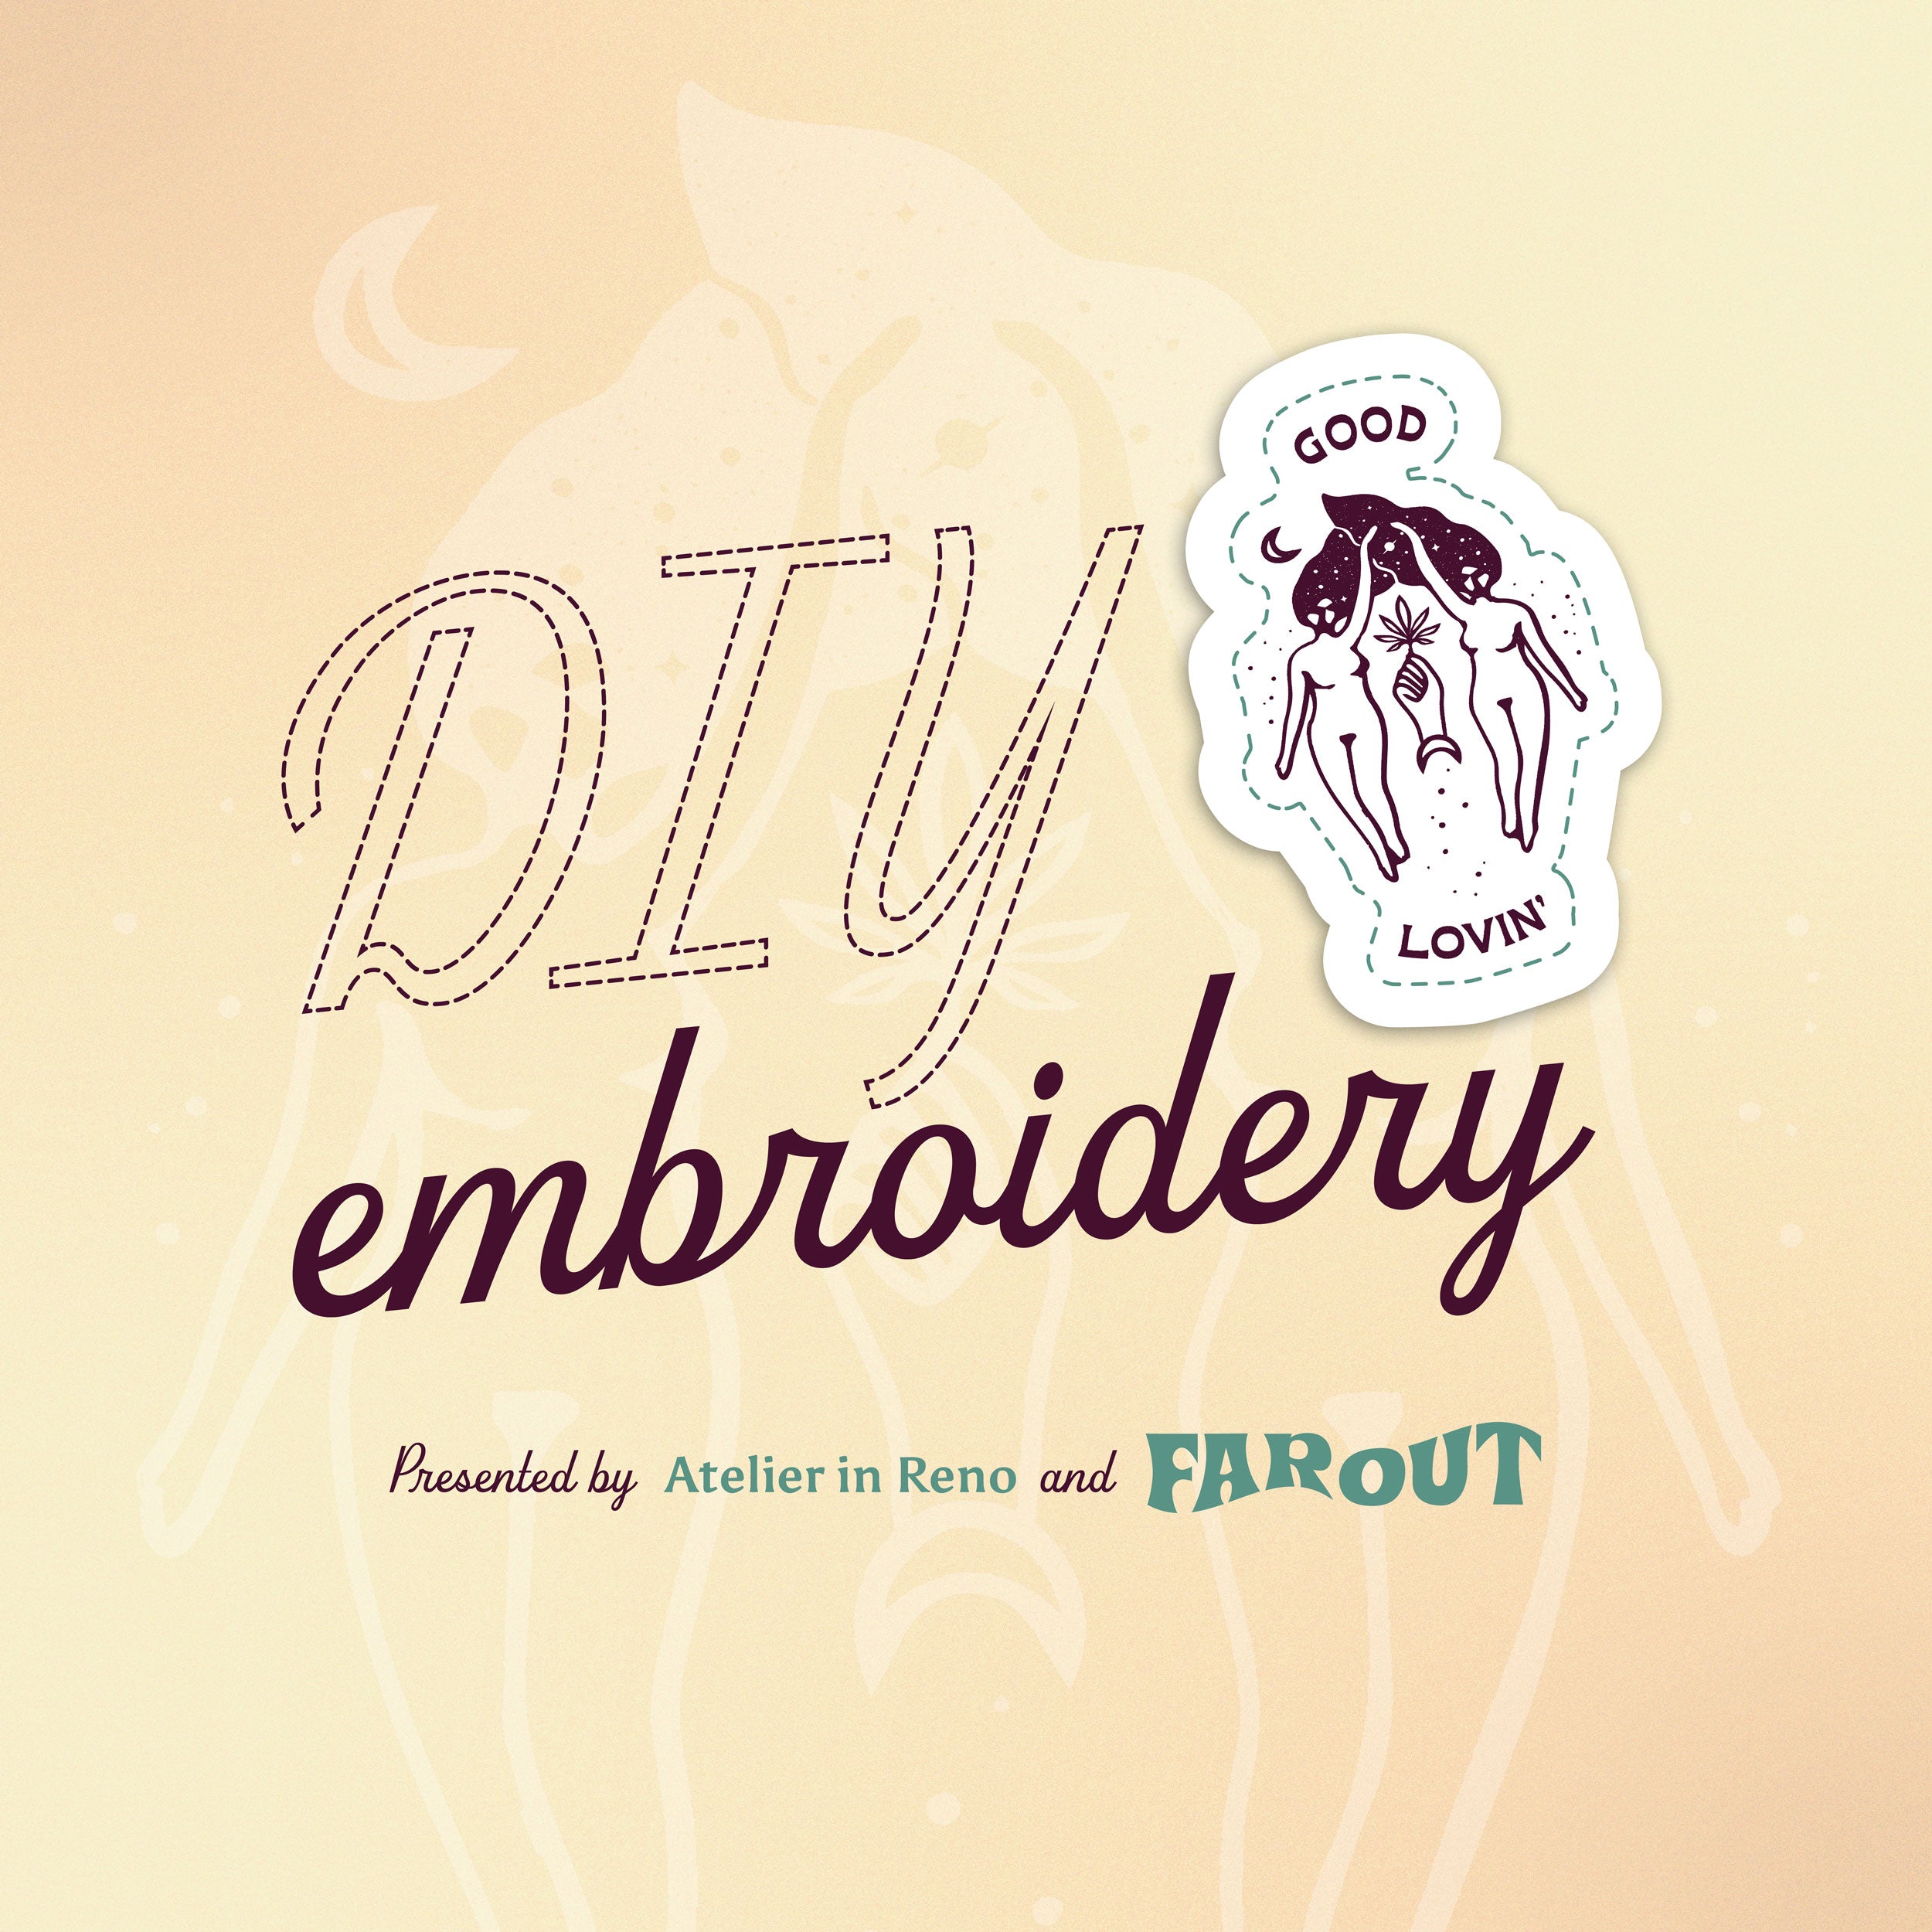 DIY Embroidery with Atelier Reno